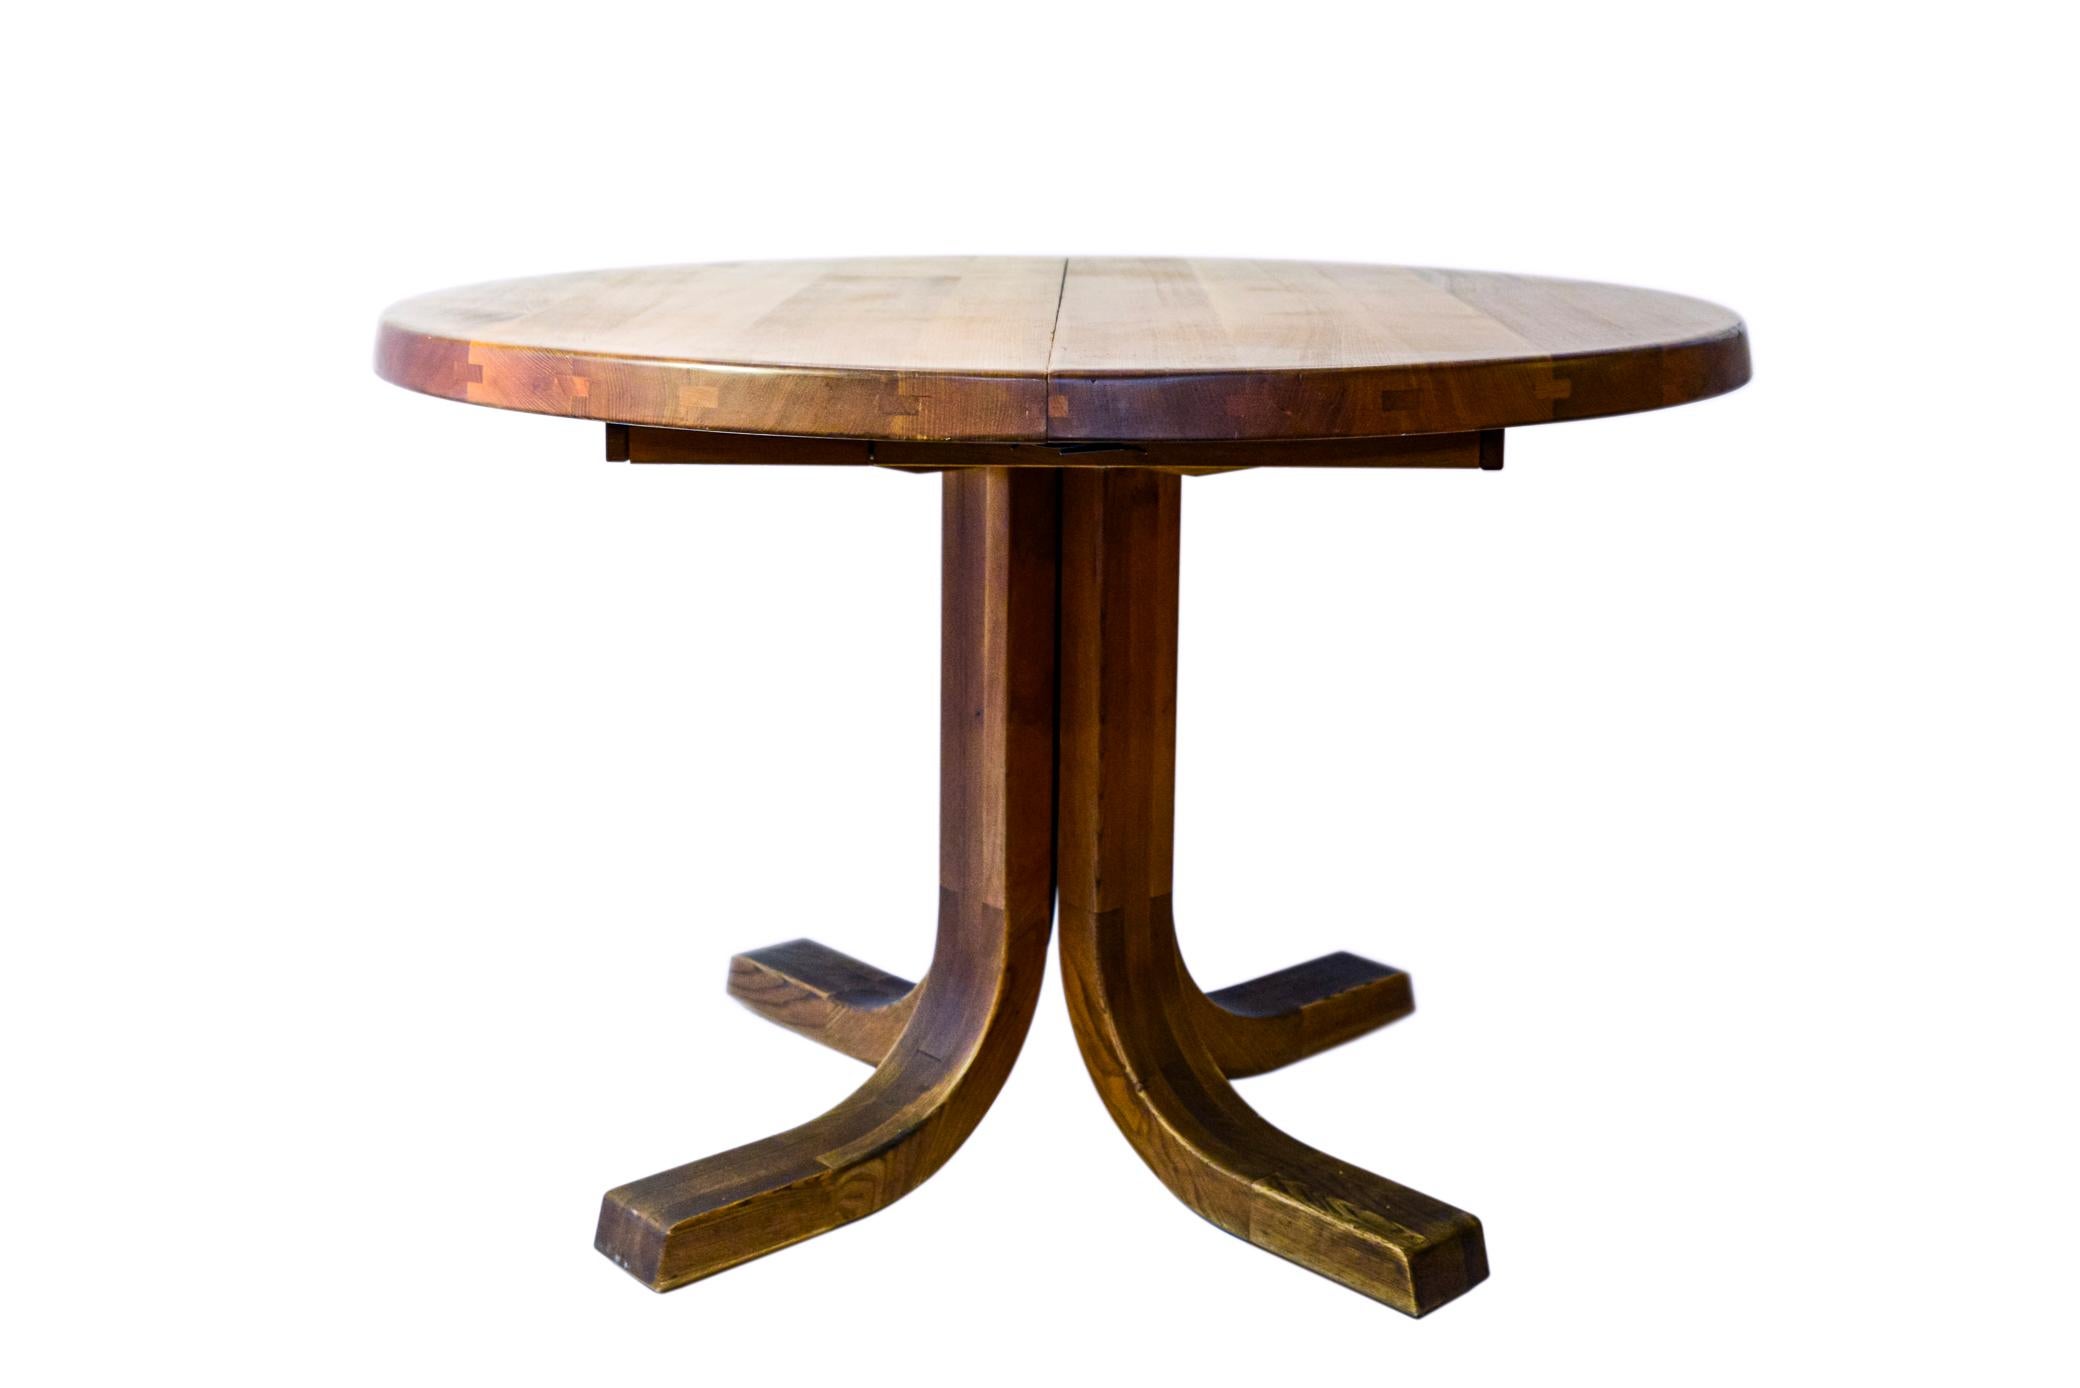 Pierre Chapo,
Extensible dining table,
Two extensions,
Model D40,
circa 1970, France.

Measures:
(Closed) diameter 110 cm, height 73 cm.
(Extensions) width 50 cm, depth 110 cm, height 4,5 cm.
(Opened) width 210 cm, depth 110 cm, height 73